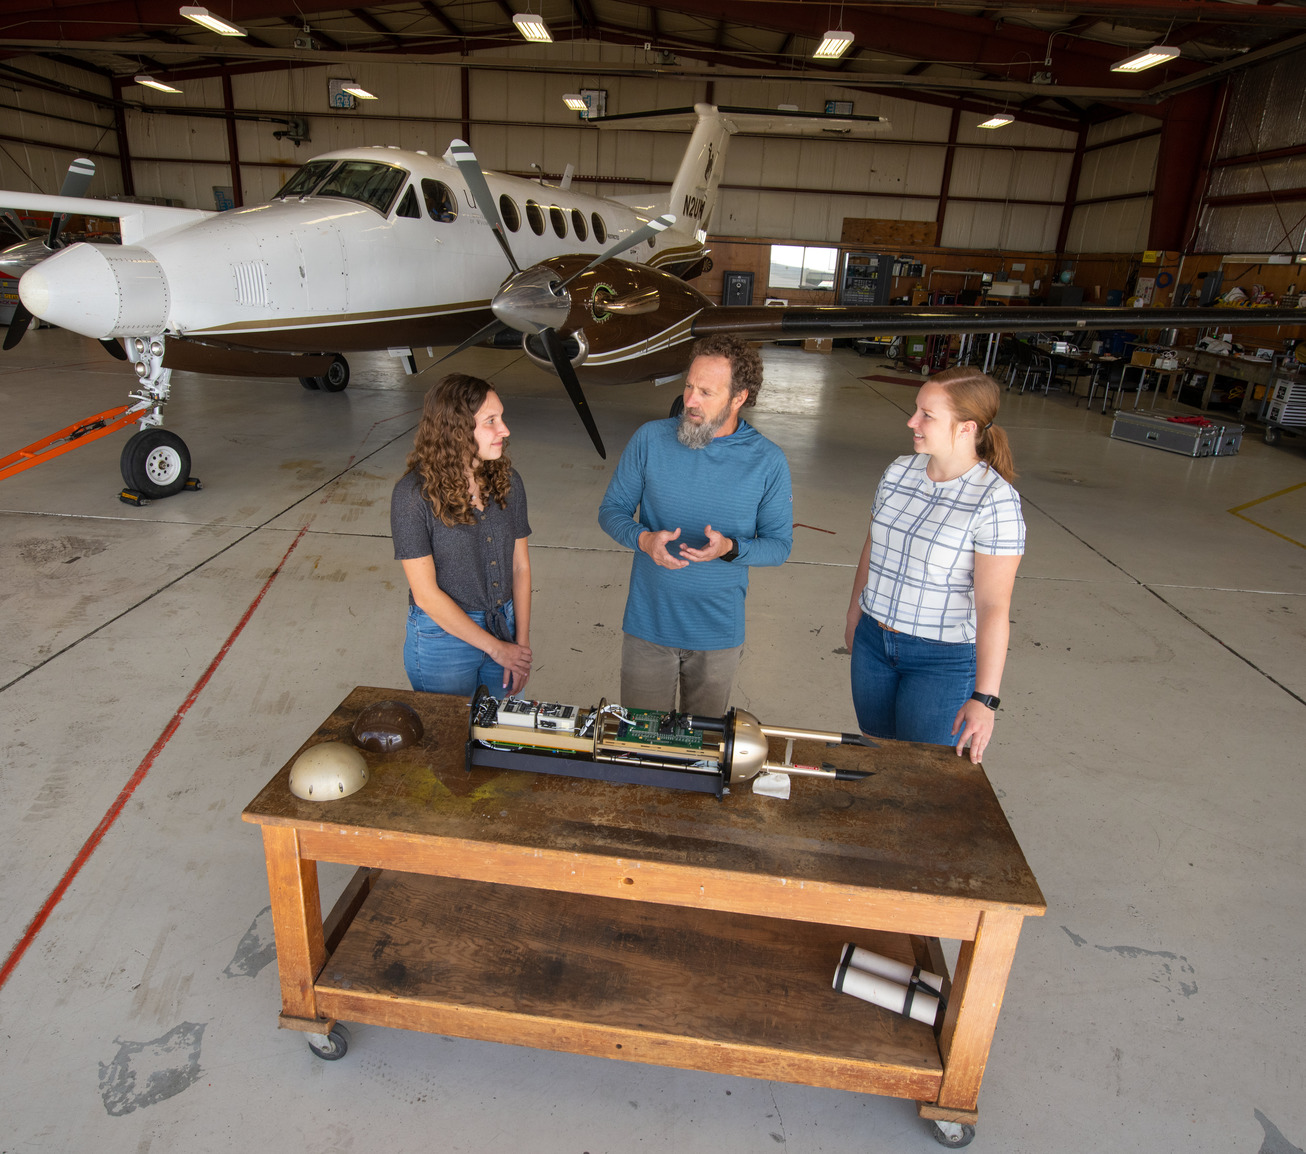 Professor teaching two students about an airplane part